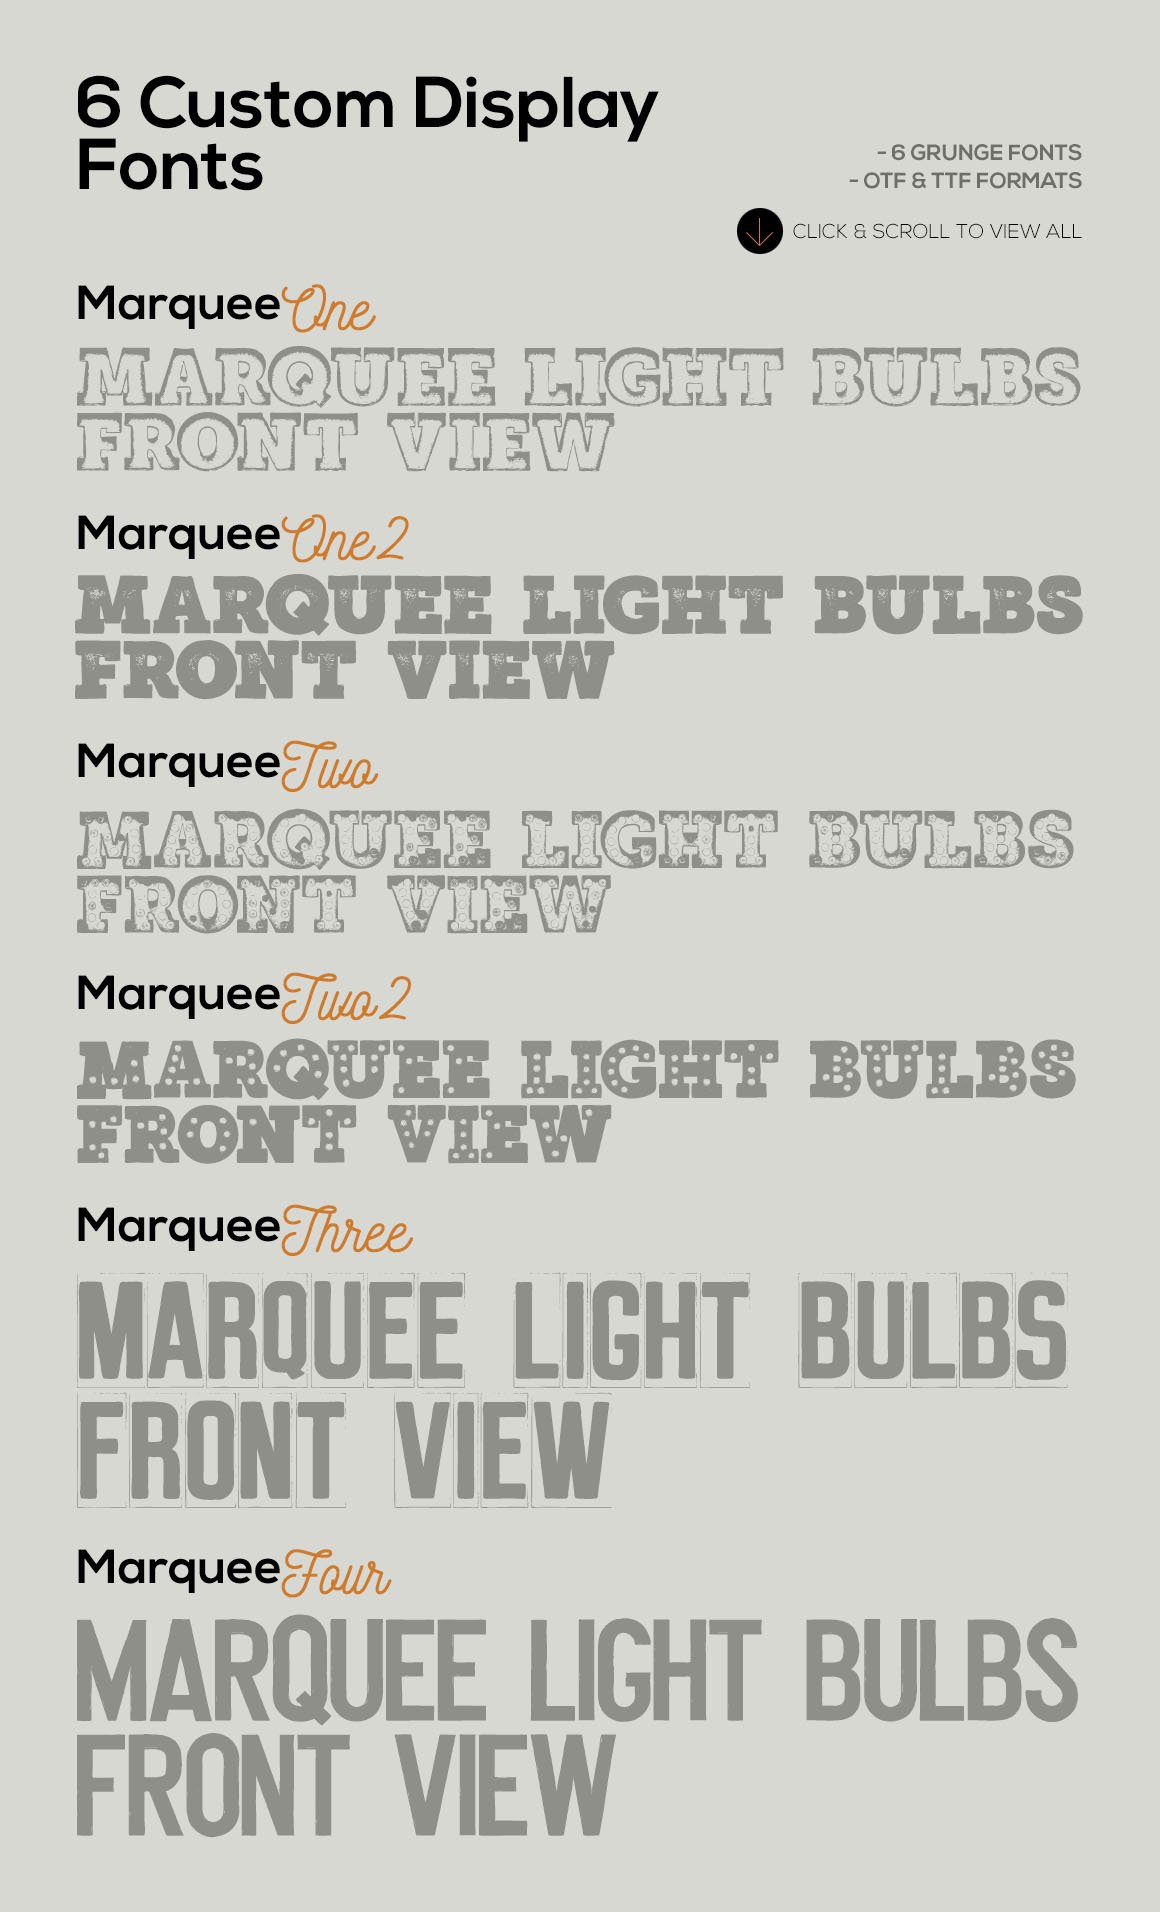 Marquee Front View - Color Fonts